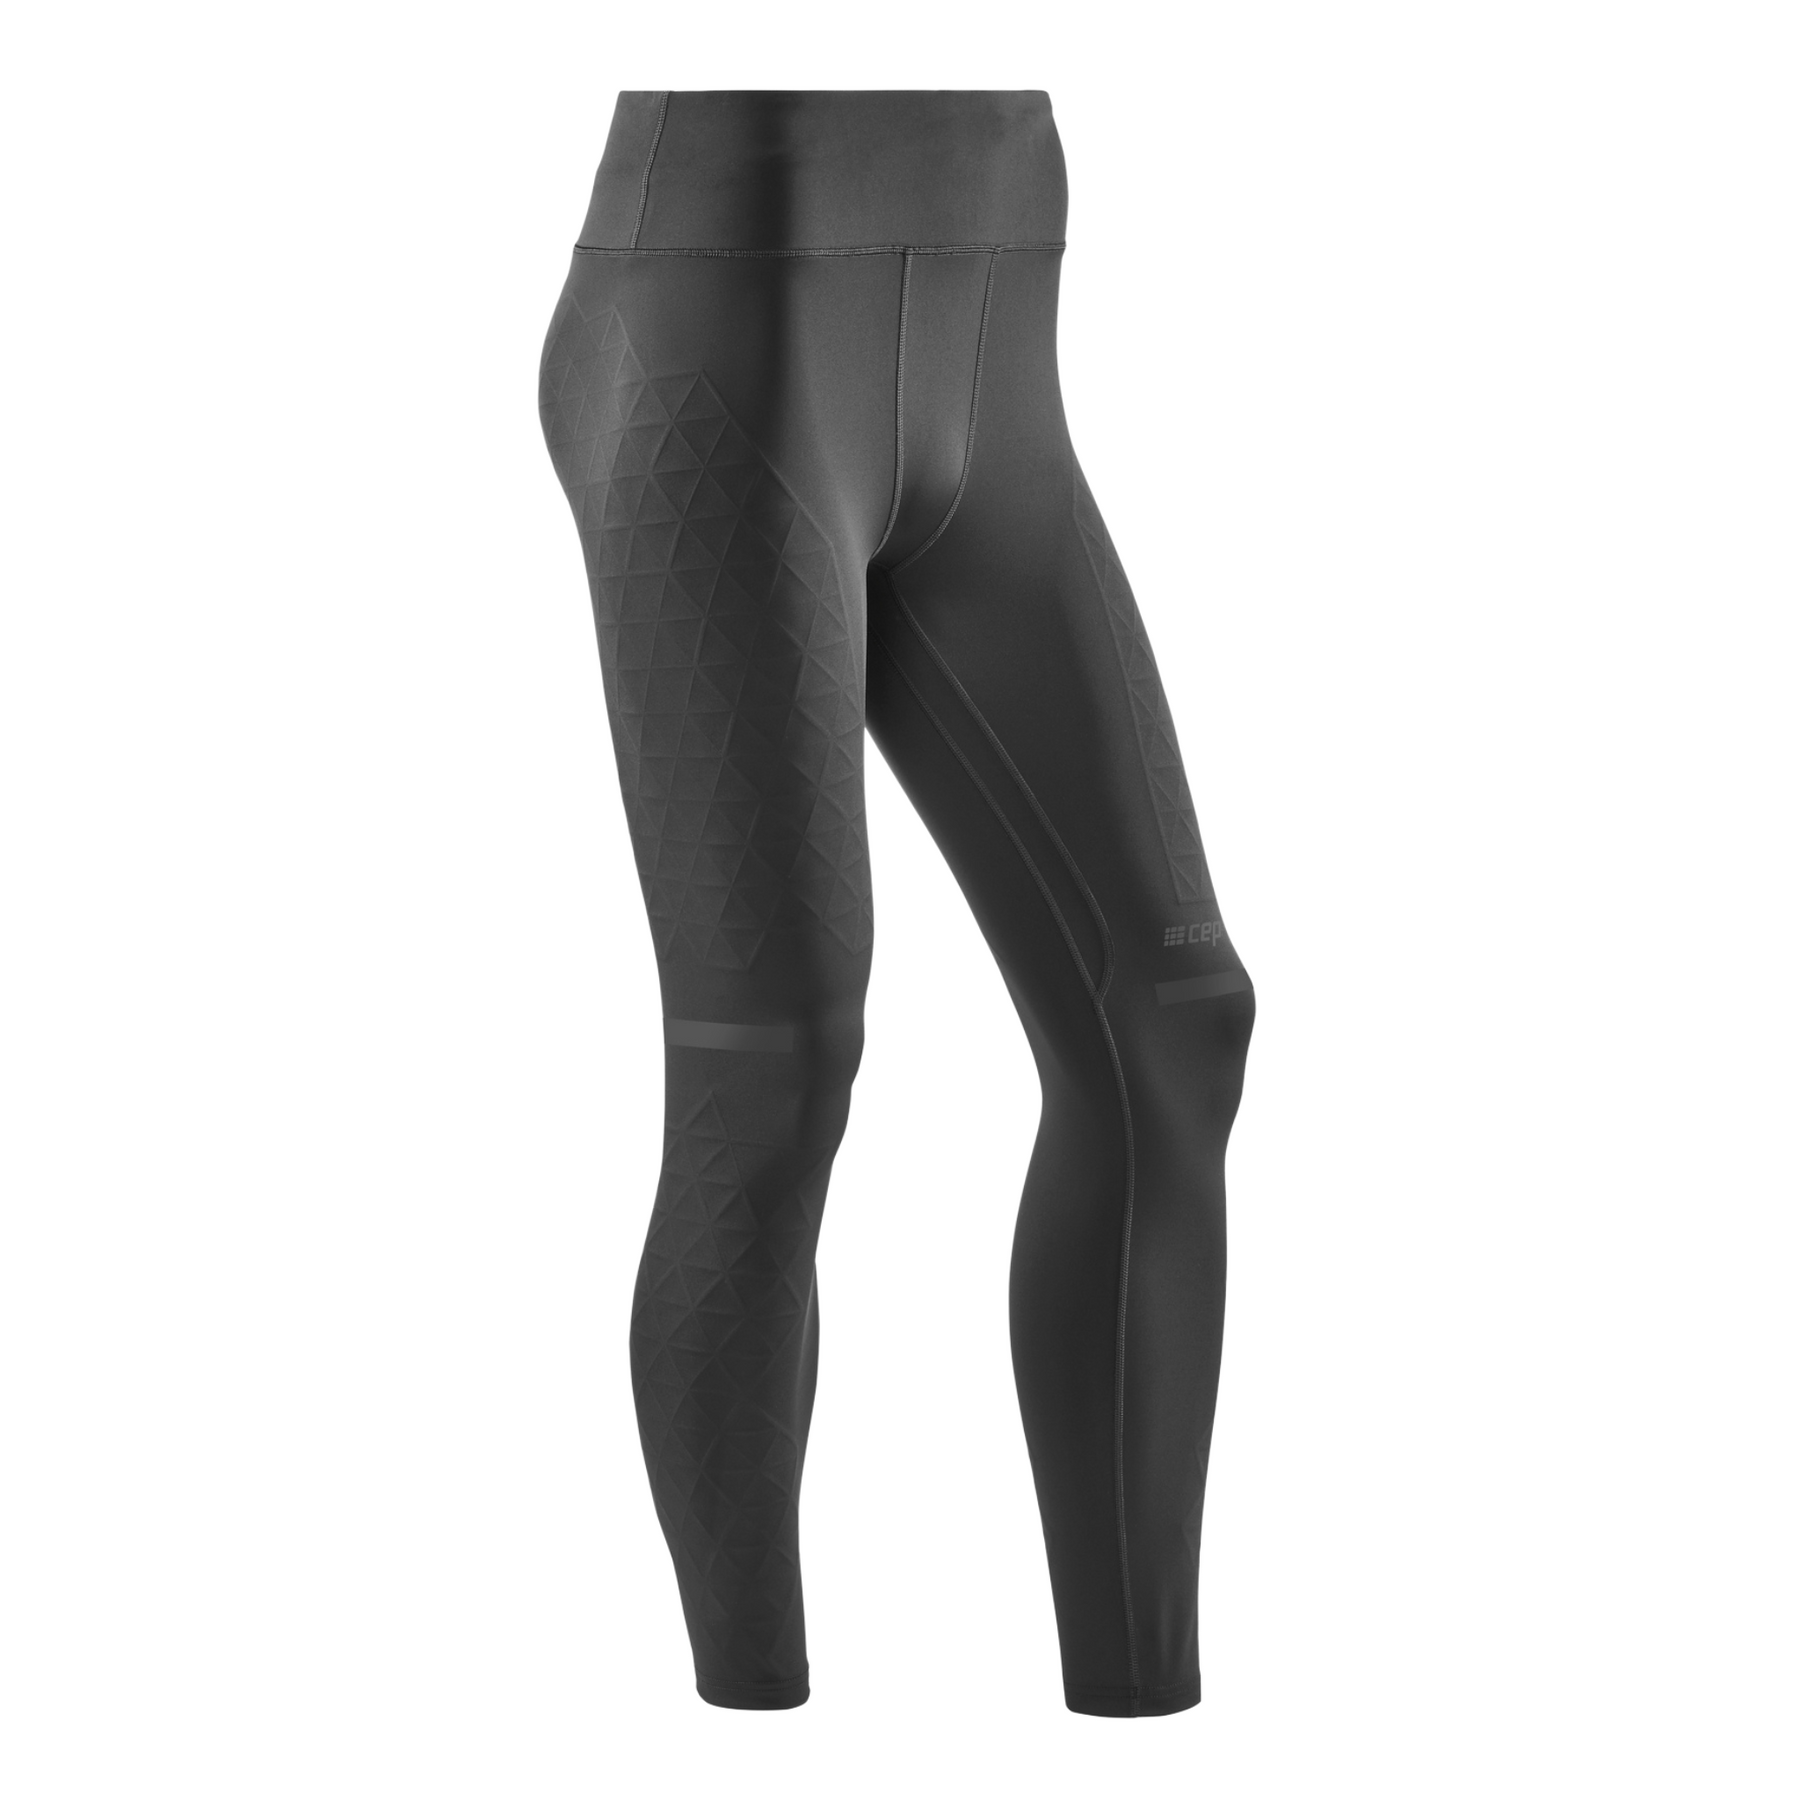 Run Support Tights for Men  CEP Activating Compression Sportswear